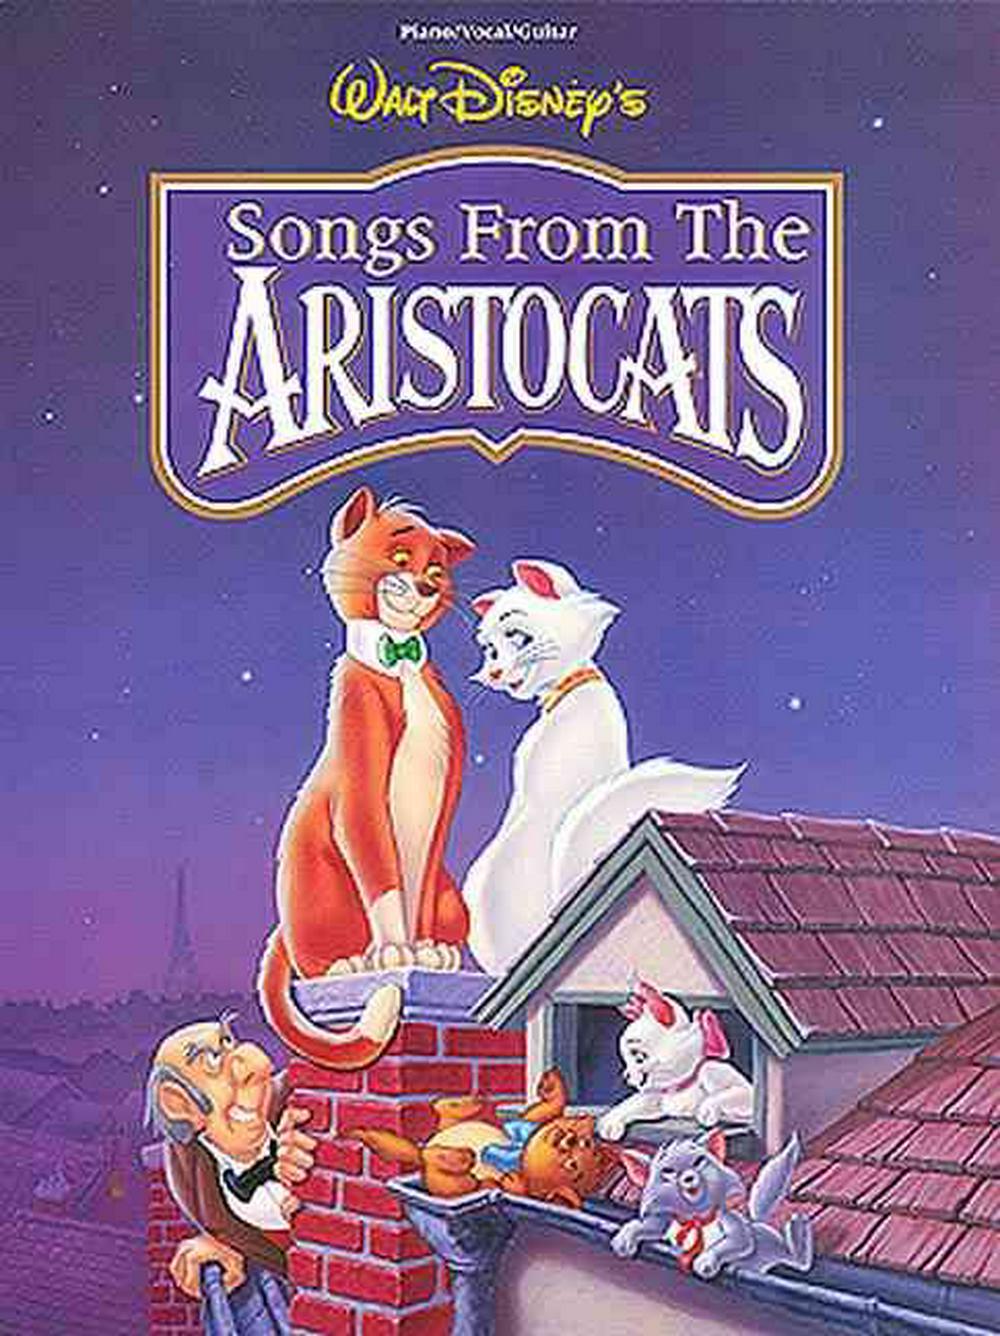 The Aristocats Title Logo - The Aristocats by Walt Disney Productions, Paperback, 9780793566884 ...